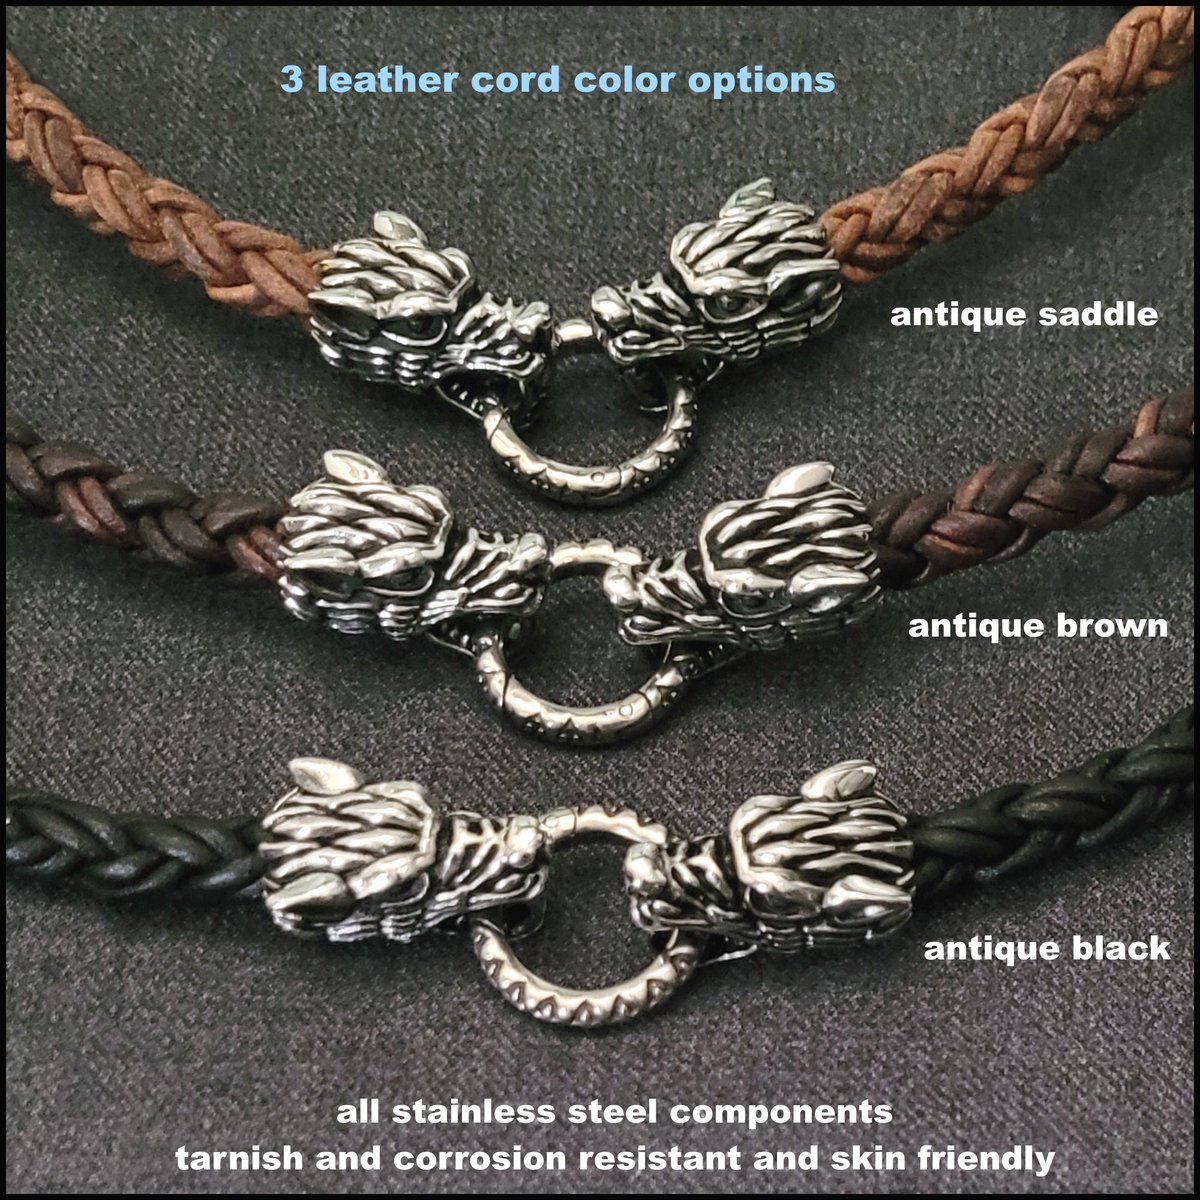 #head #snarling Guardian Wolves Tribal Braid Leather Cord Necklace with Large Beautifully Sculpted Mjolnir Thor's Hammer
$135.00
Get here https://t.co/ABiuO94IyP https://t.co/p0aV3cl7hR